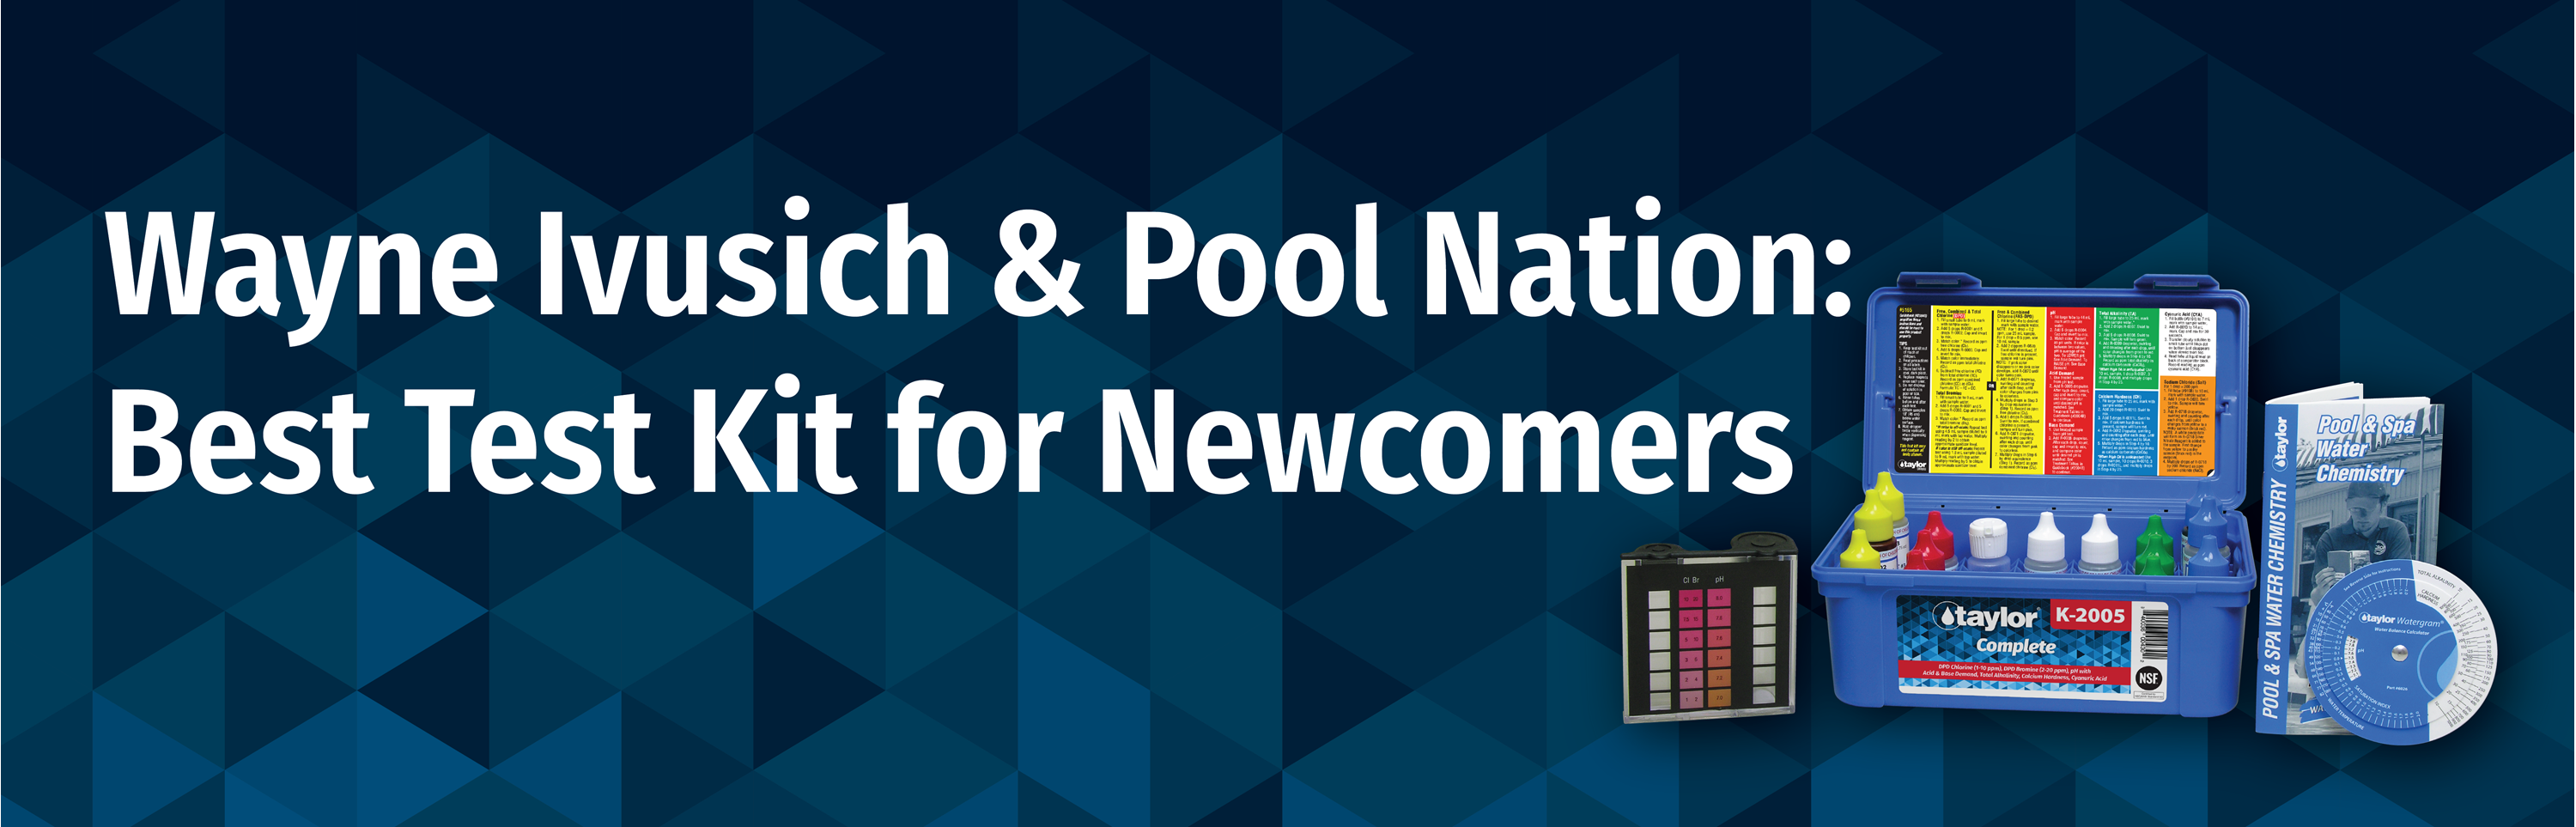 What’s the Best Test Kit for Pool/Spa Newcomers? Wayne Ivusich, 30-Year Industry Veteran, Will Tell You!